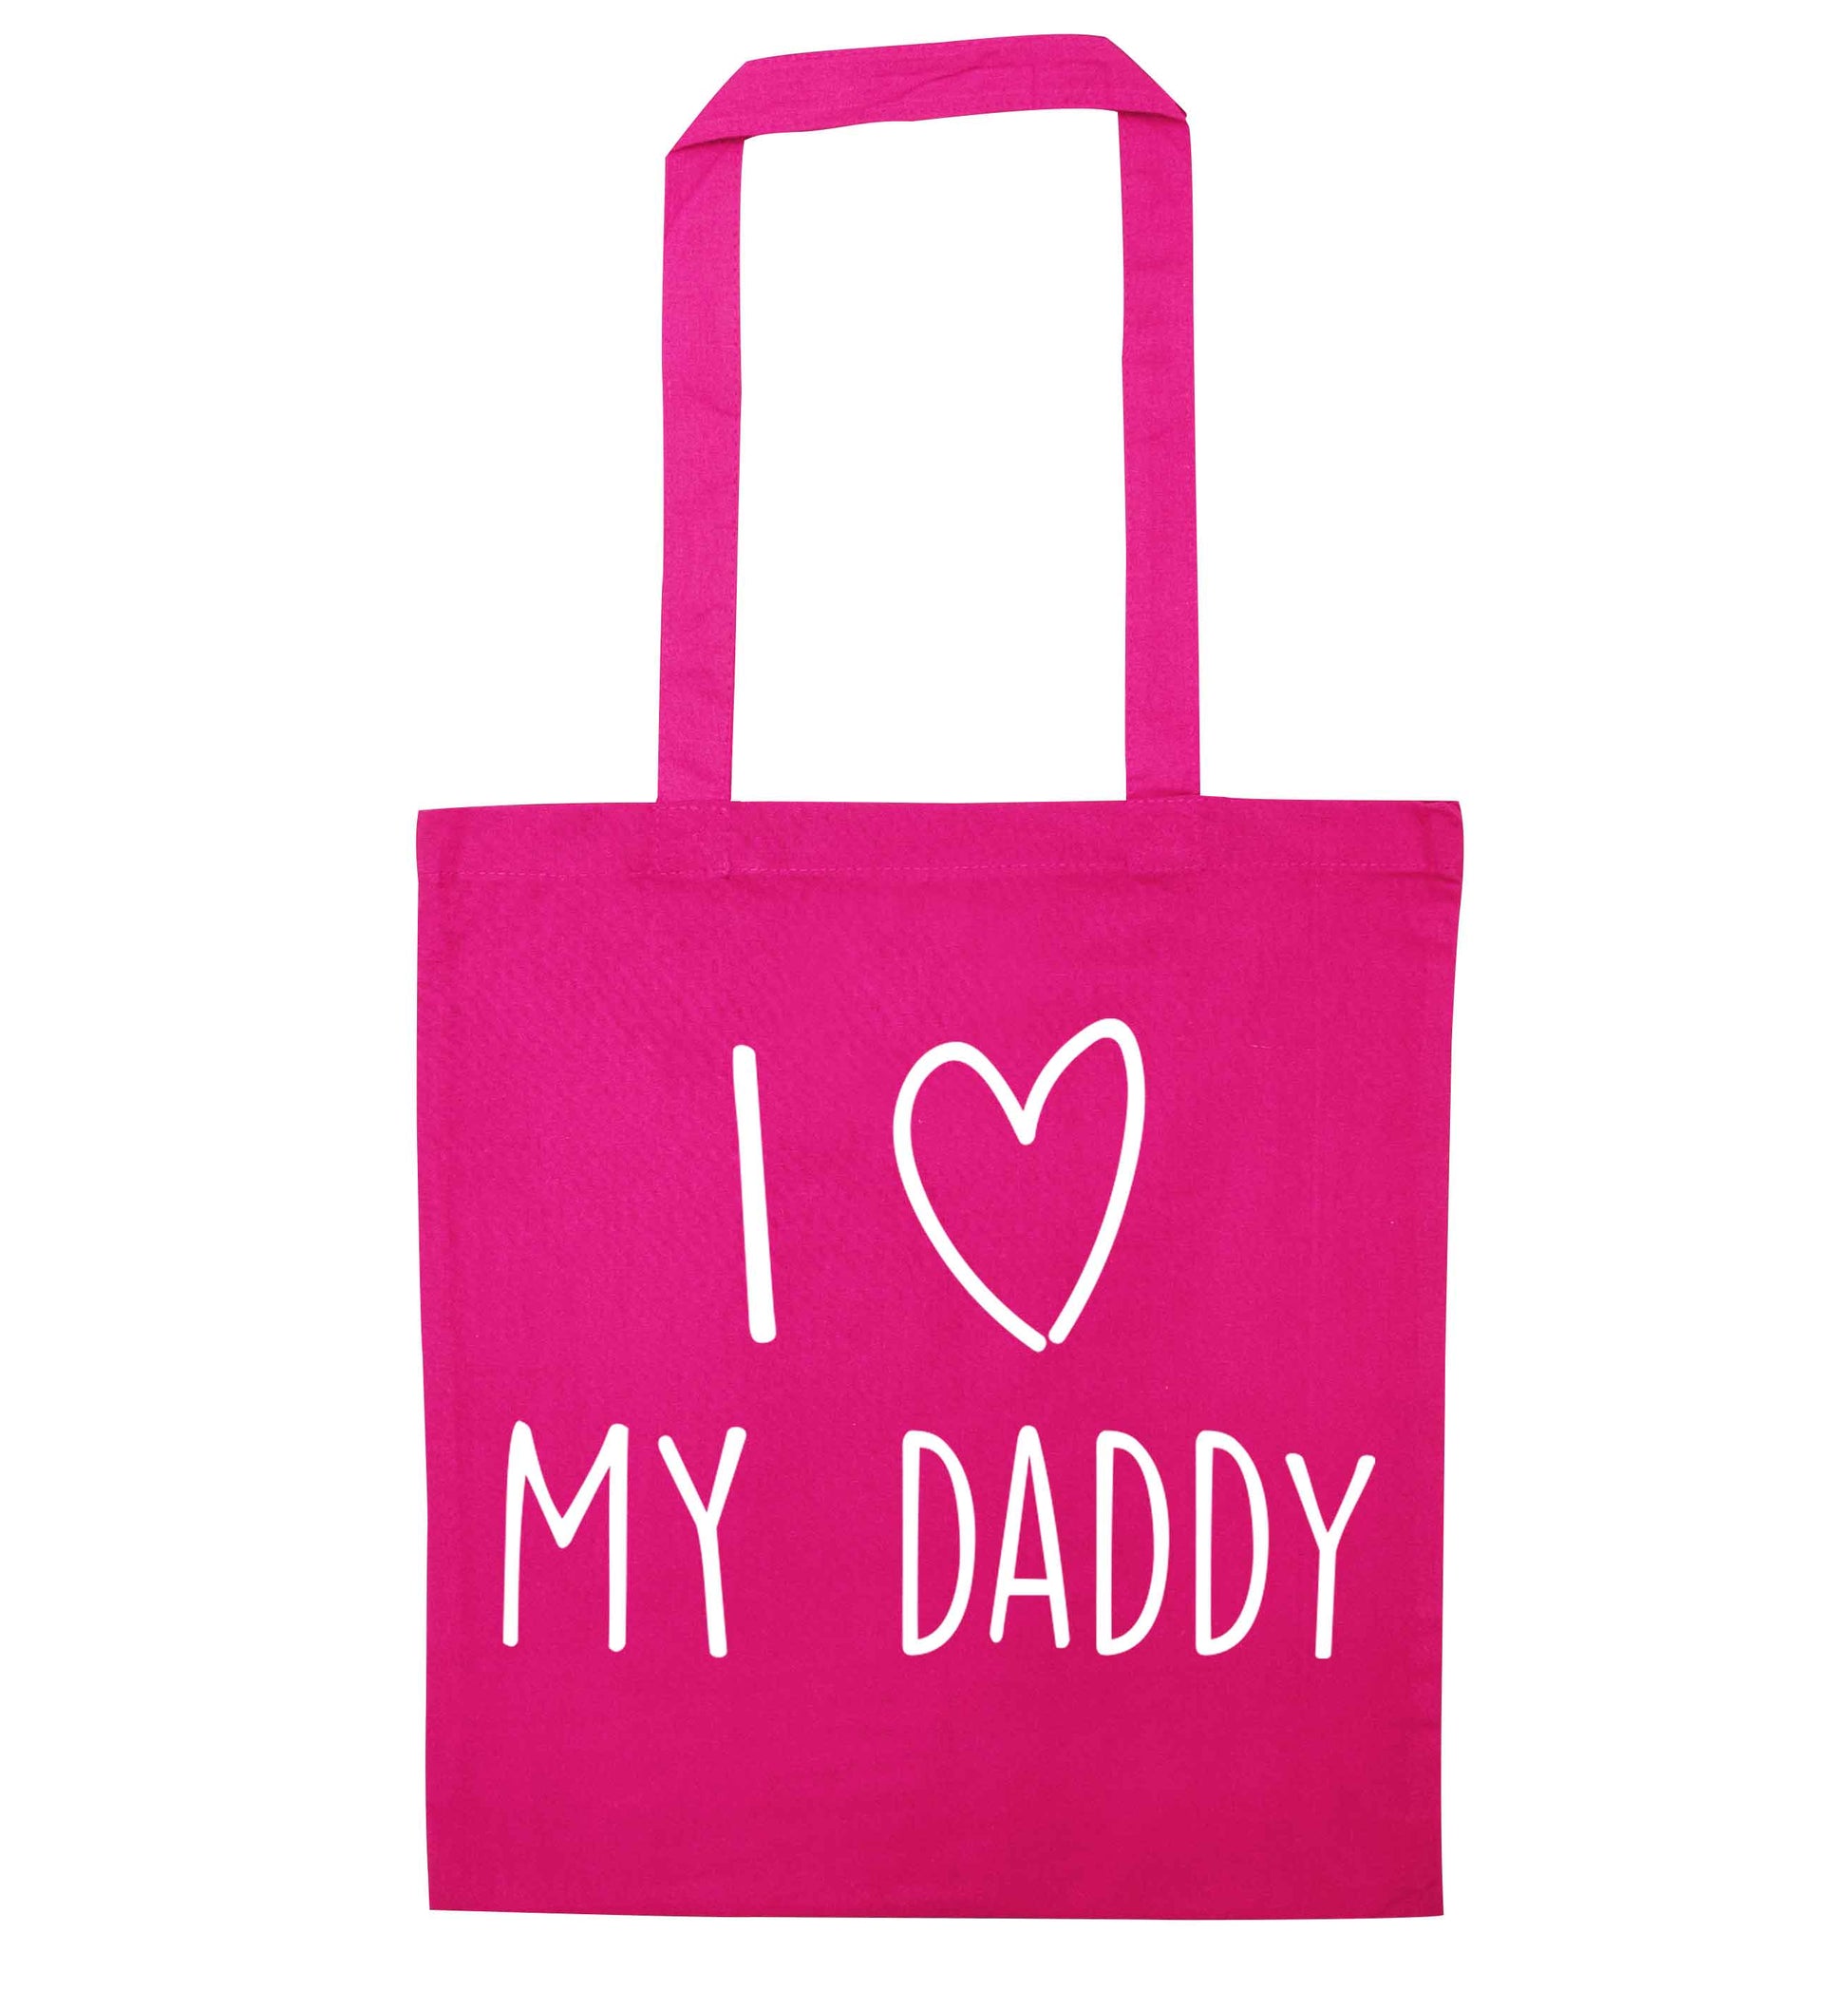 I love my daddy pink tote bag